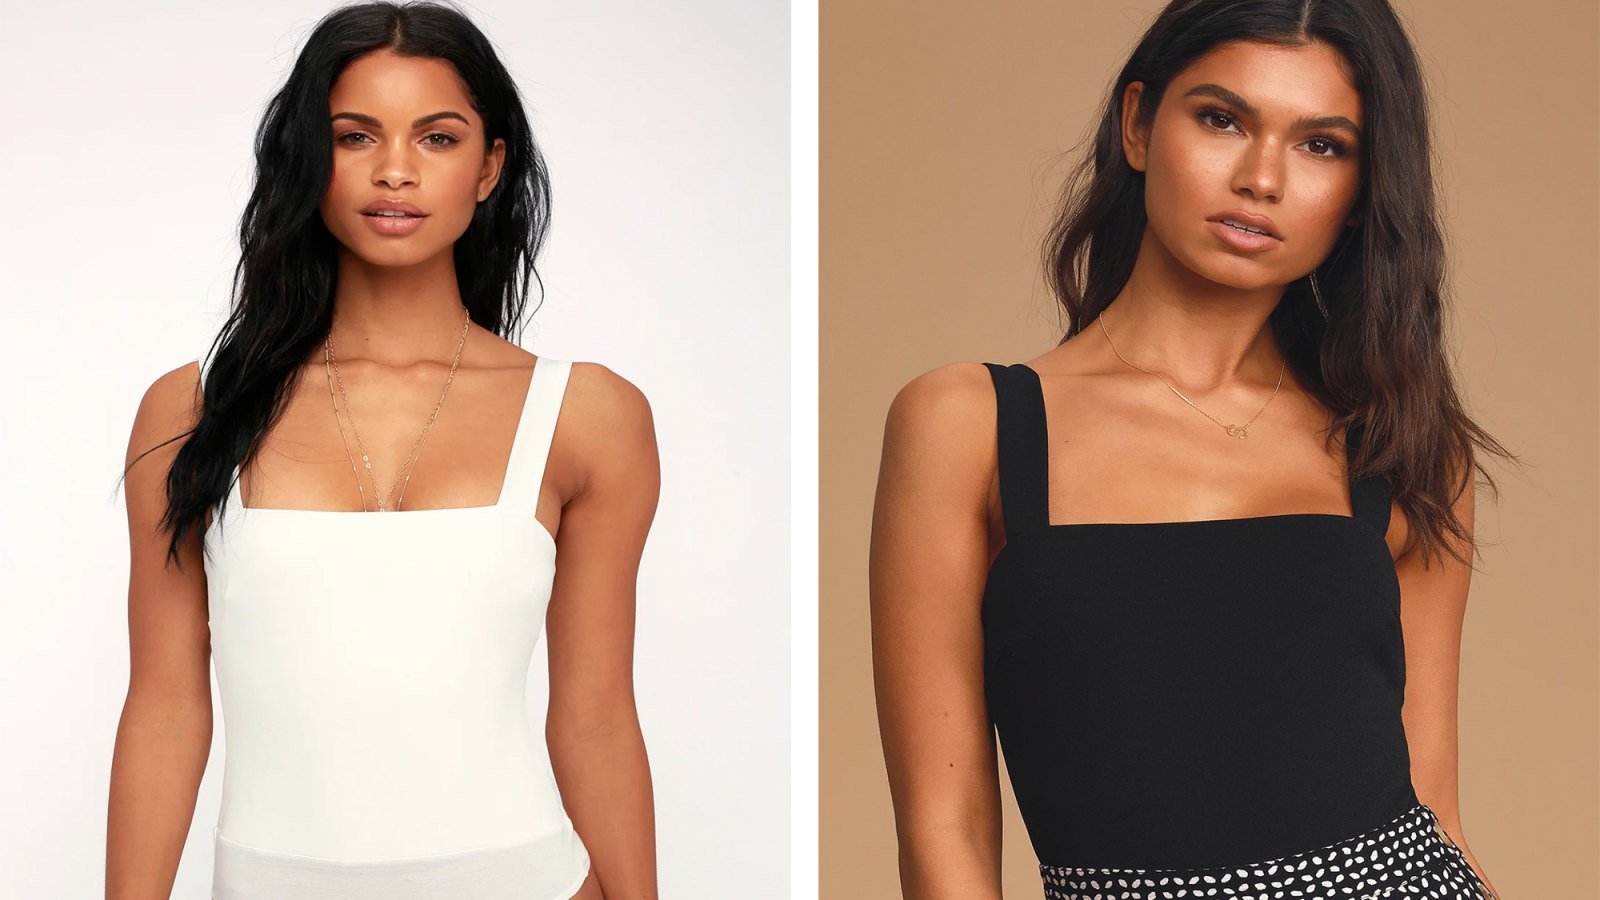 This Top-Rated Bodysuit From Lulus Is So Comfy and Flattering